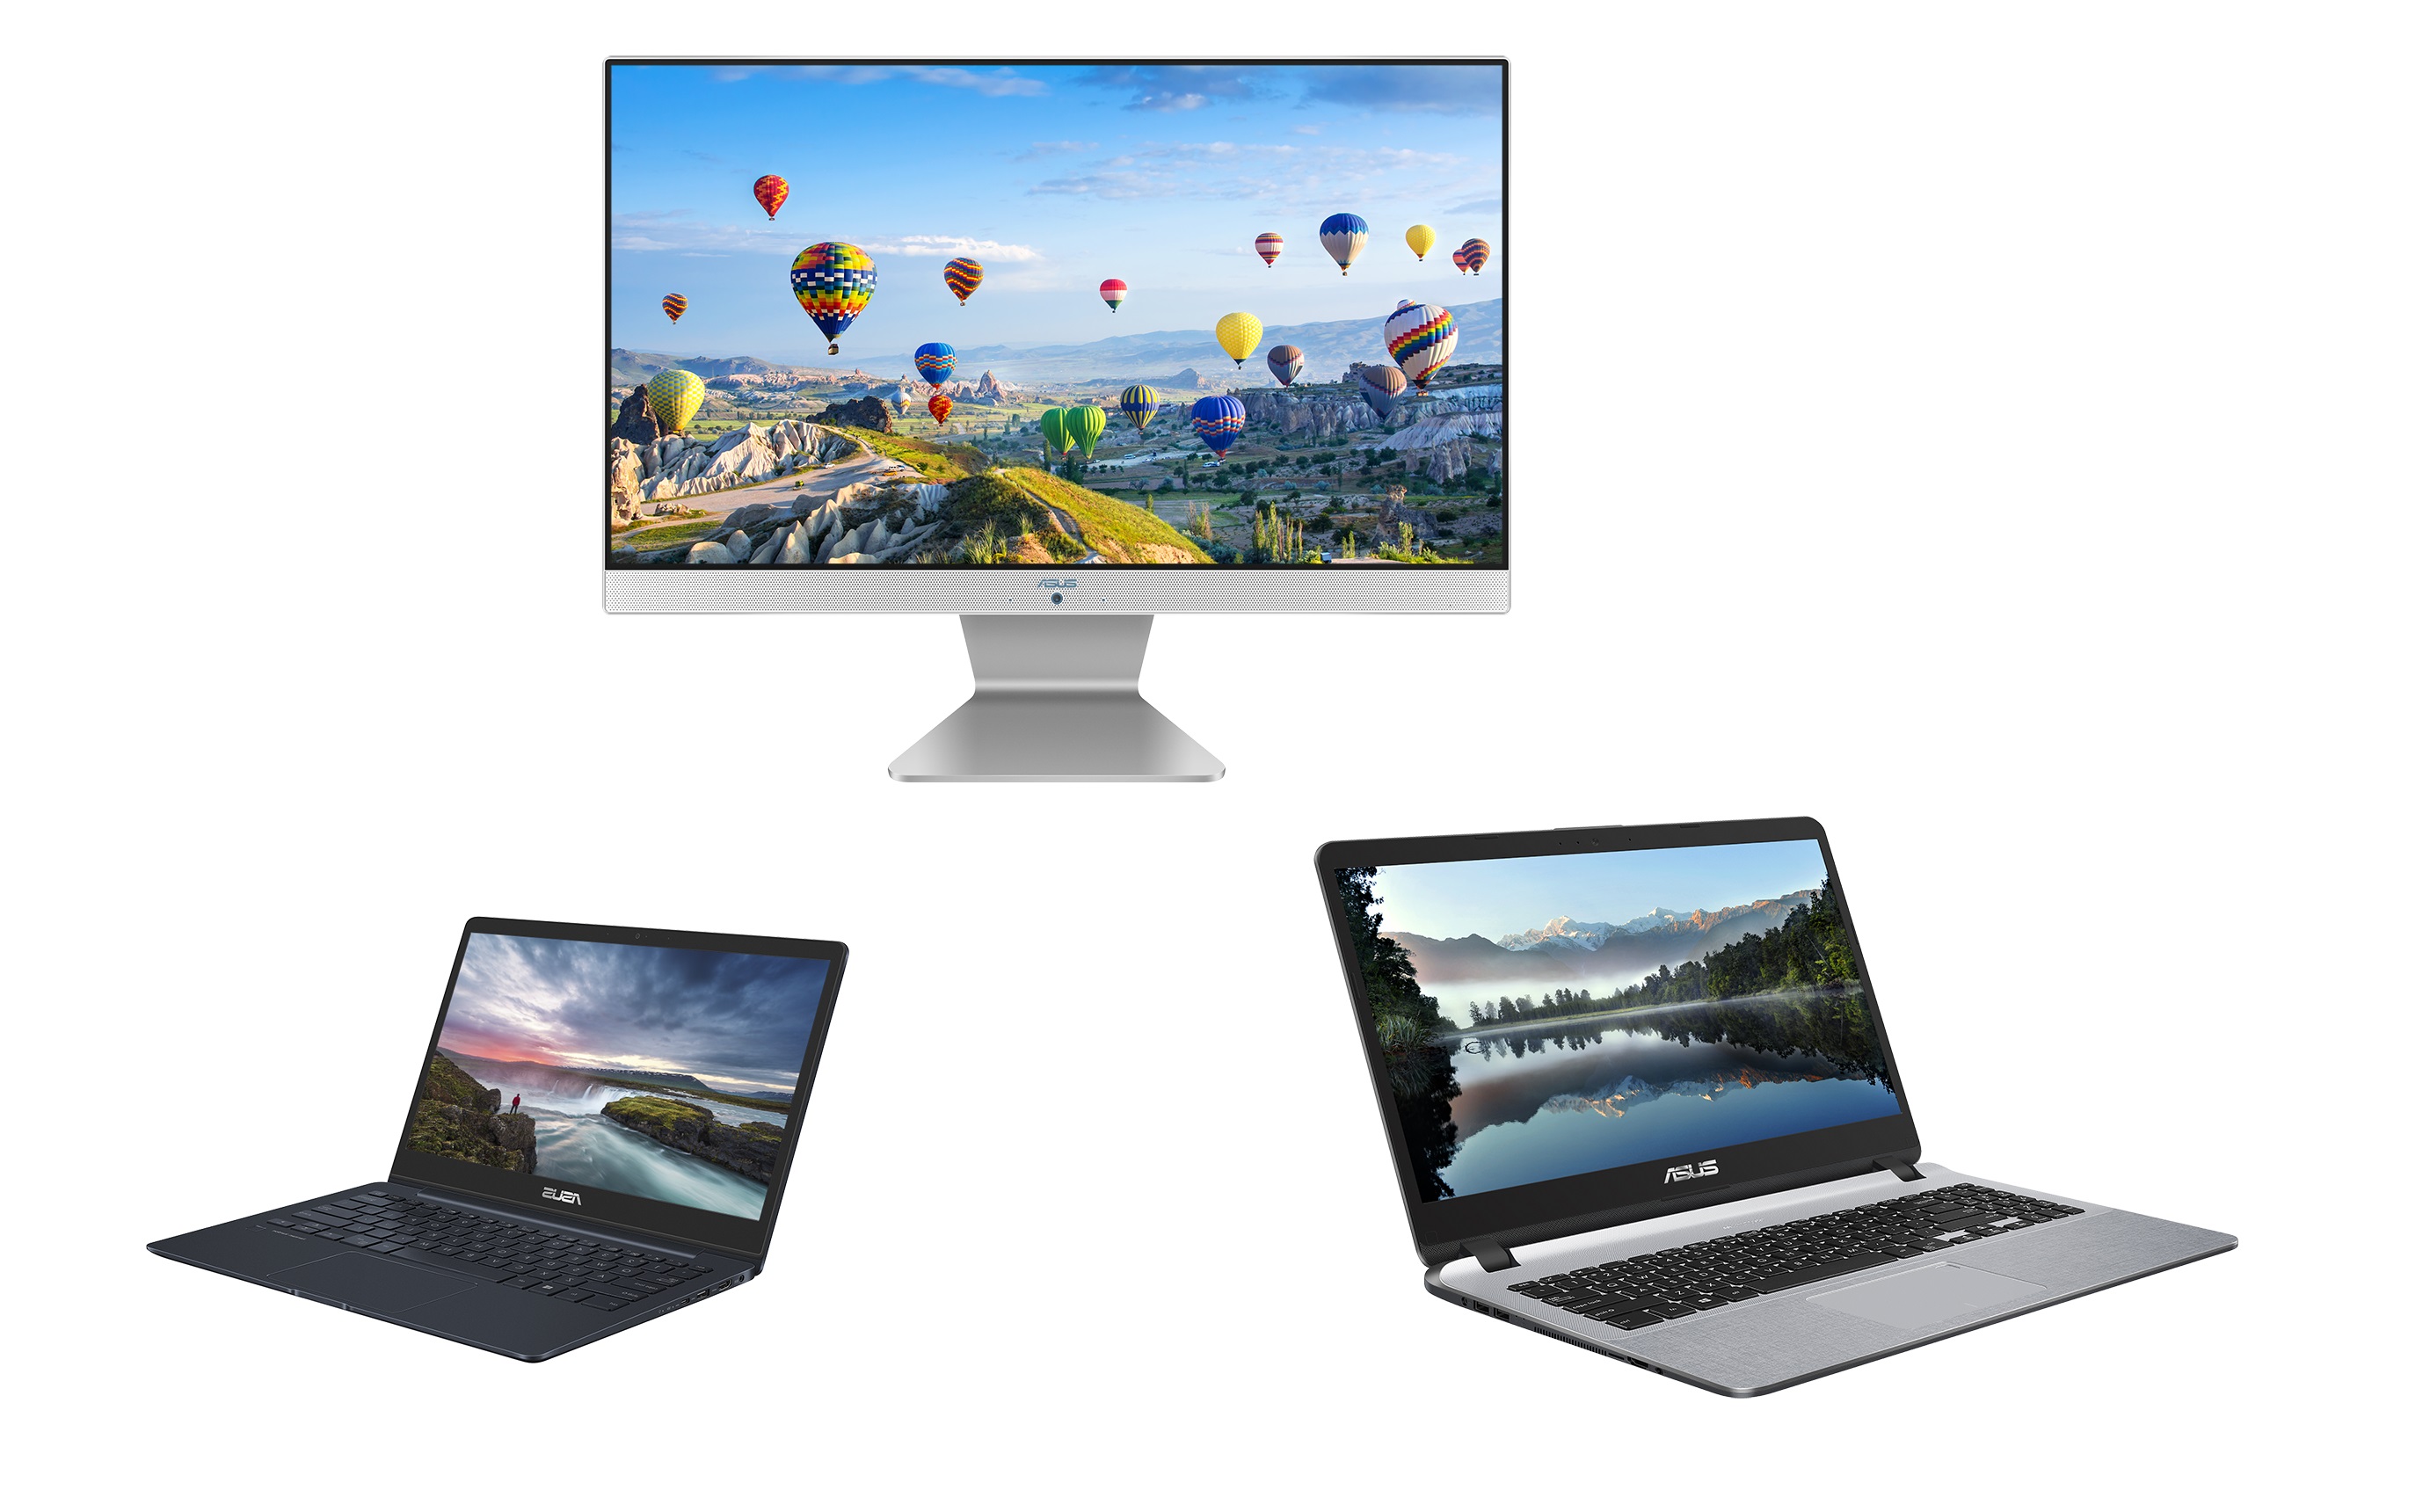 CES 2018: ASUS previews new consumer laptops and AiO PCs